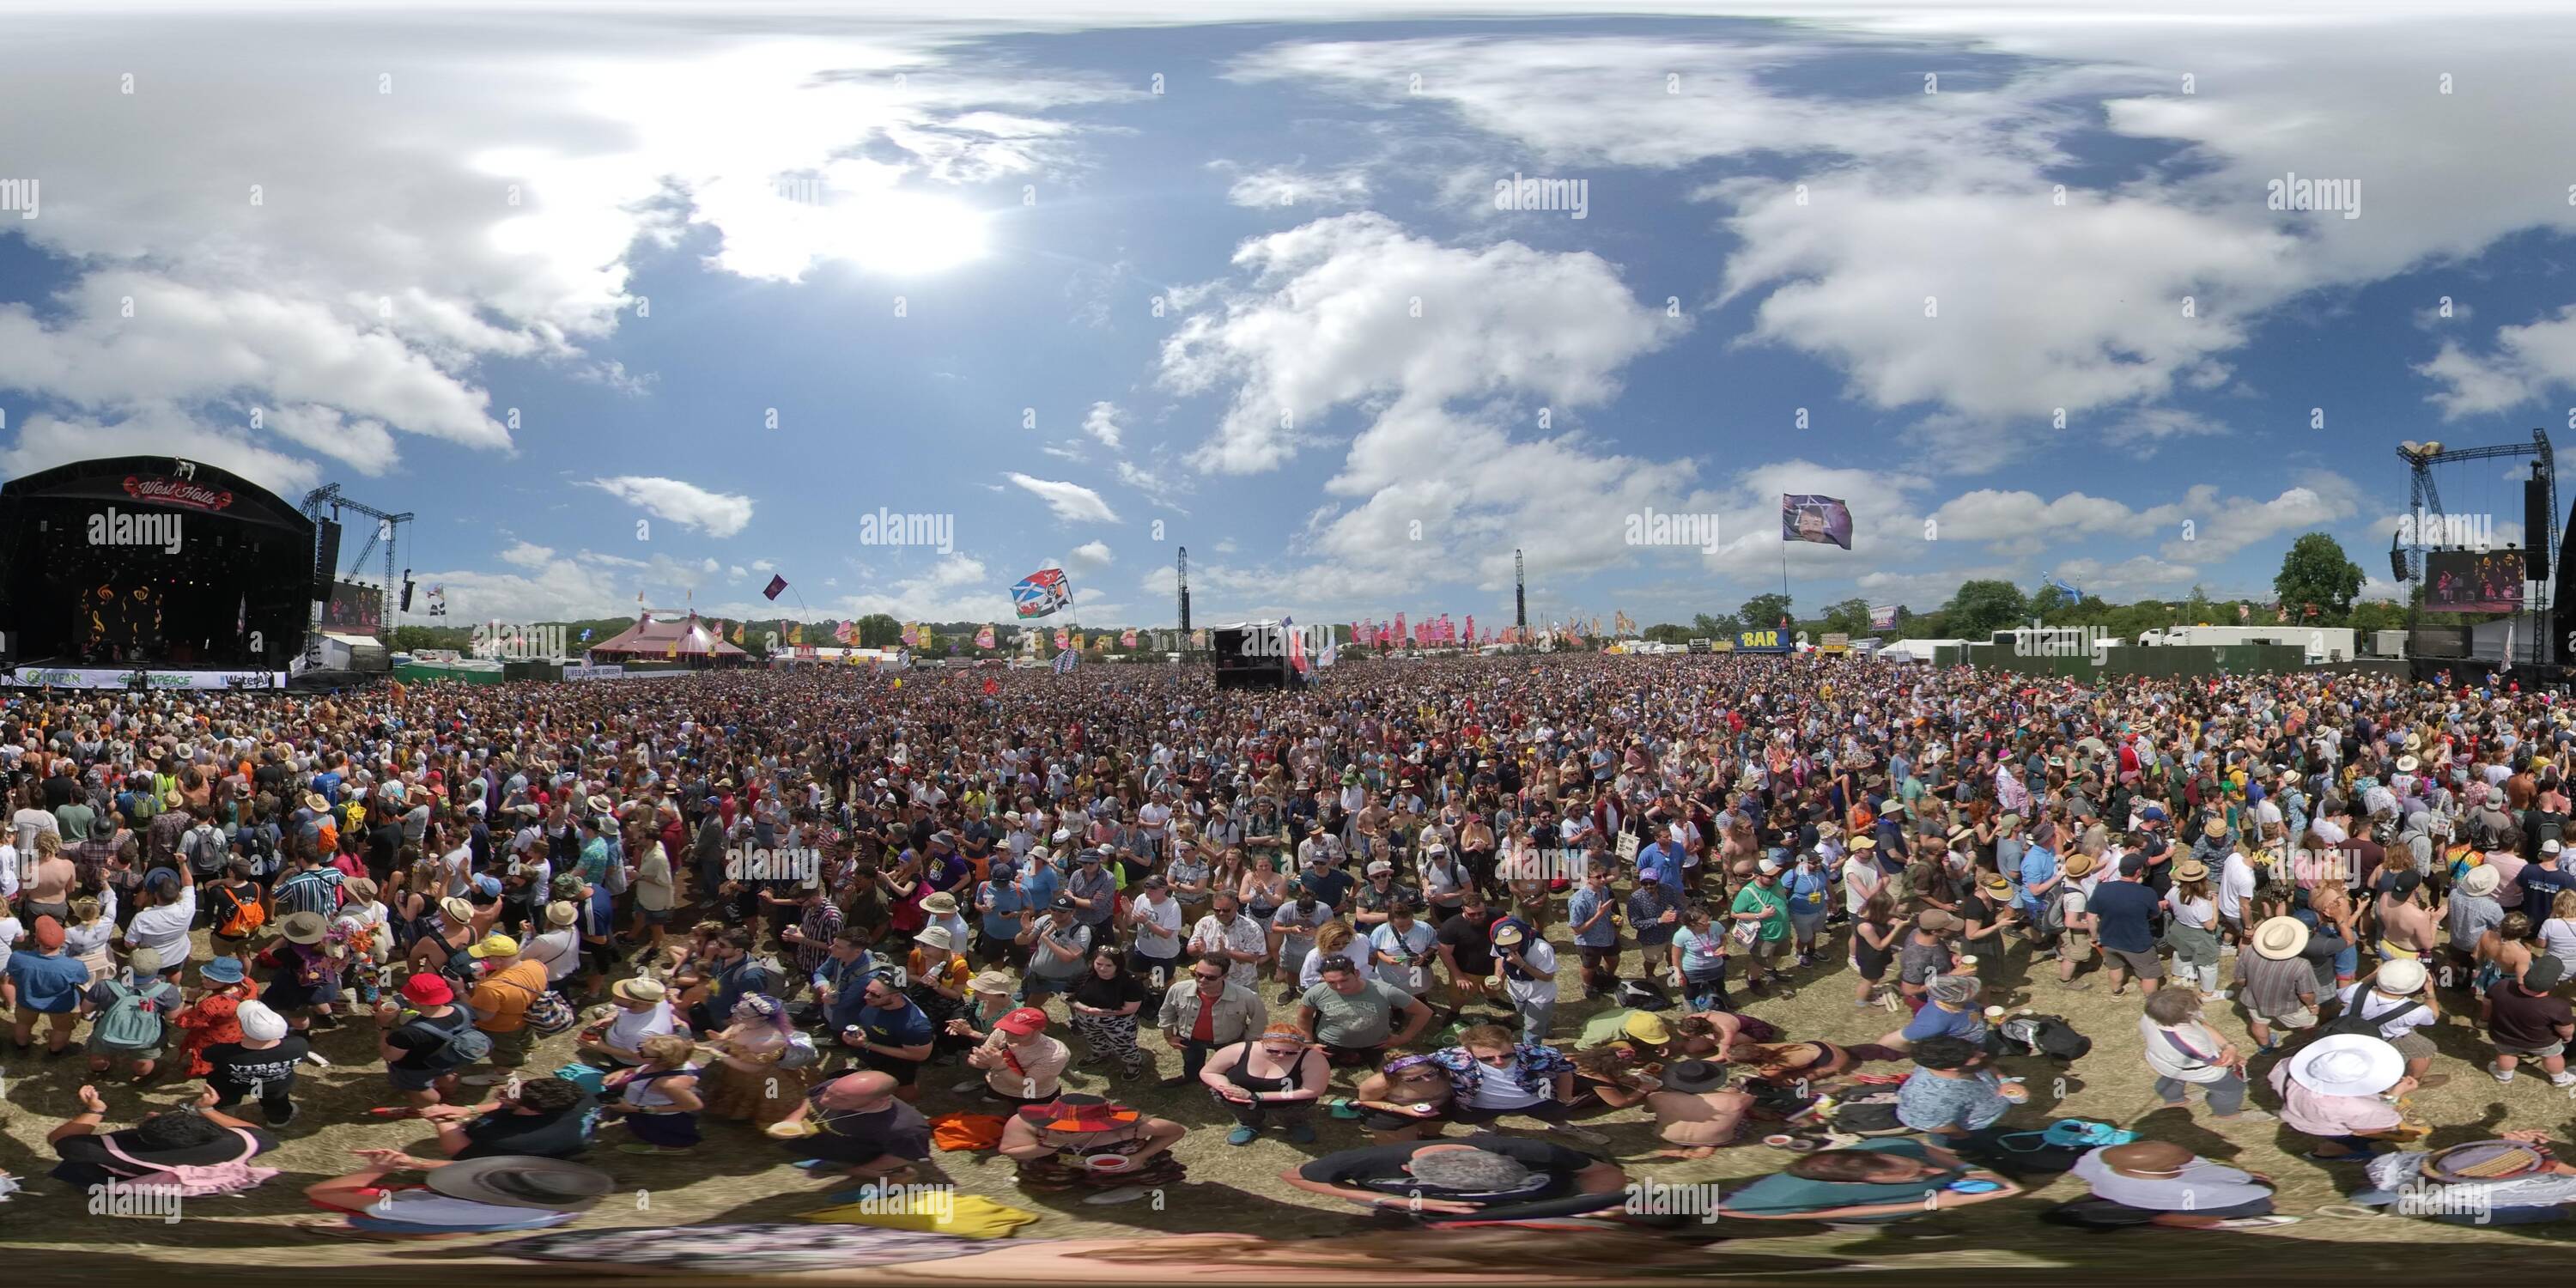 360 degree panoramic view of 360° View of The West Holt Stage at The Glastonbury Festival 2019